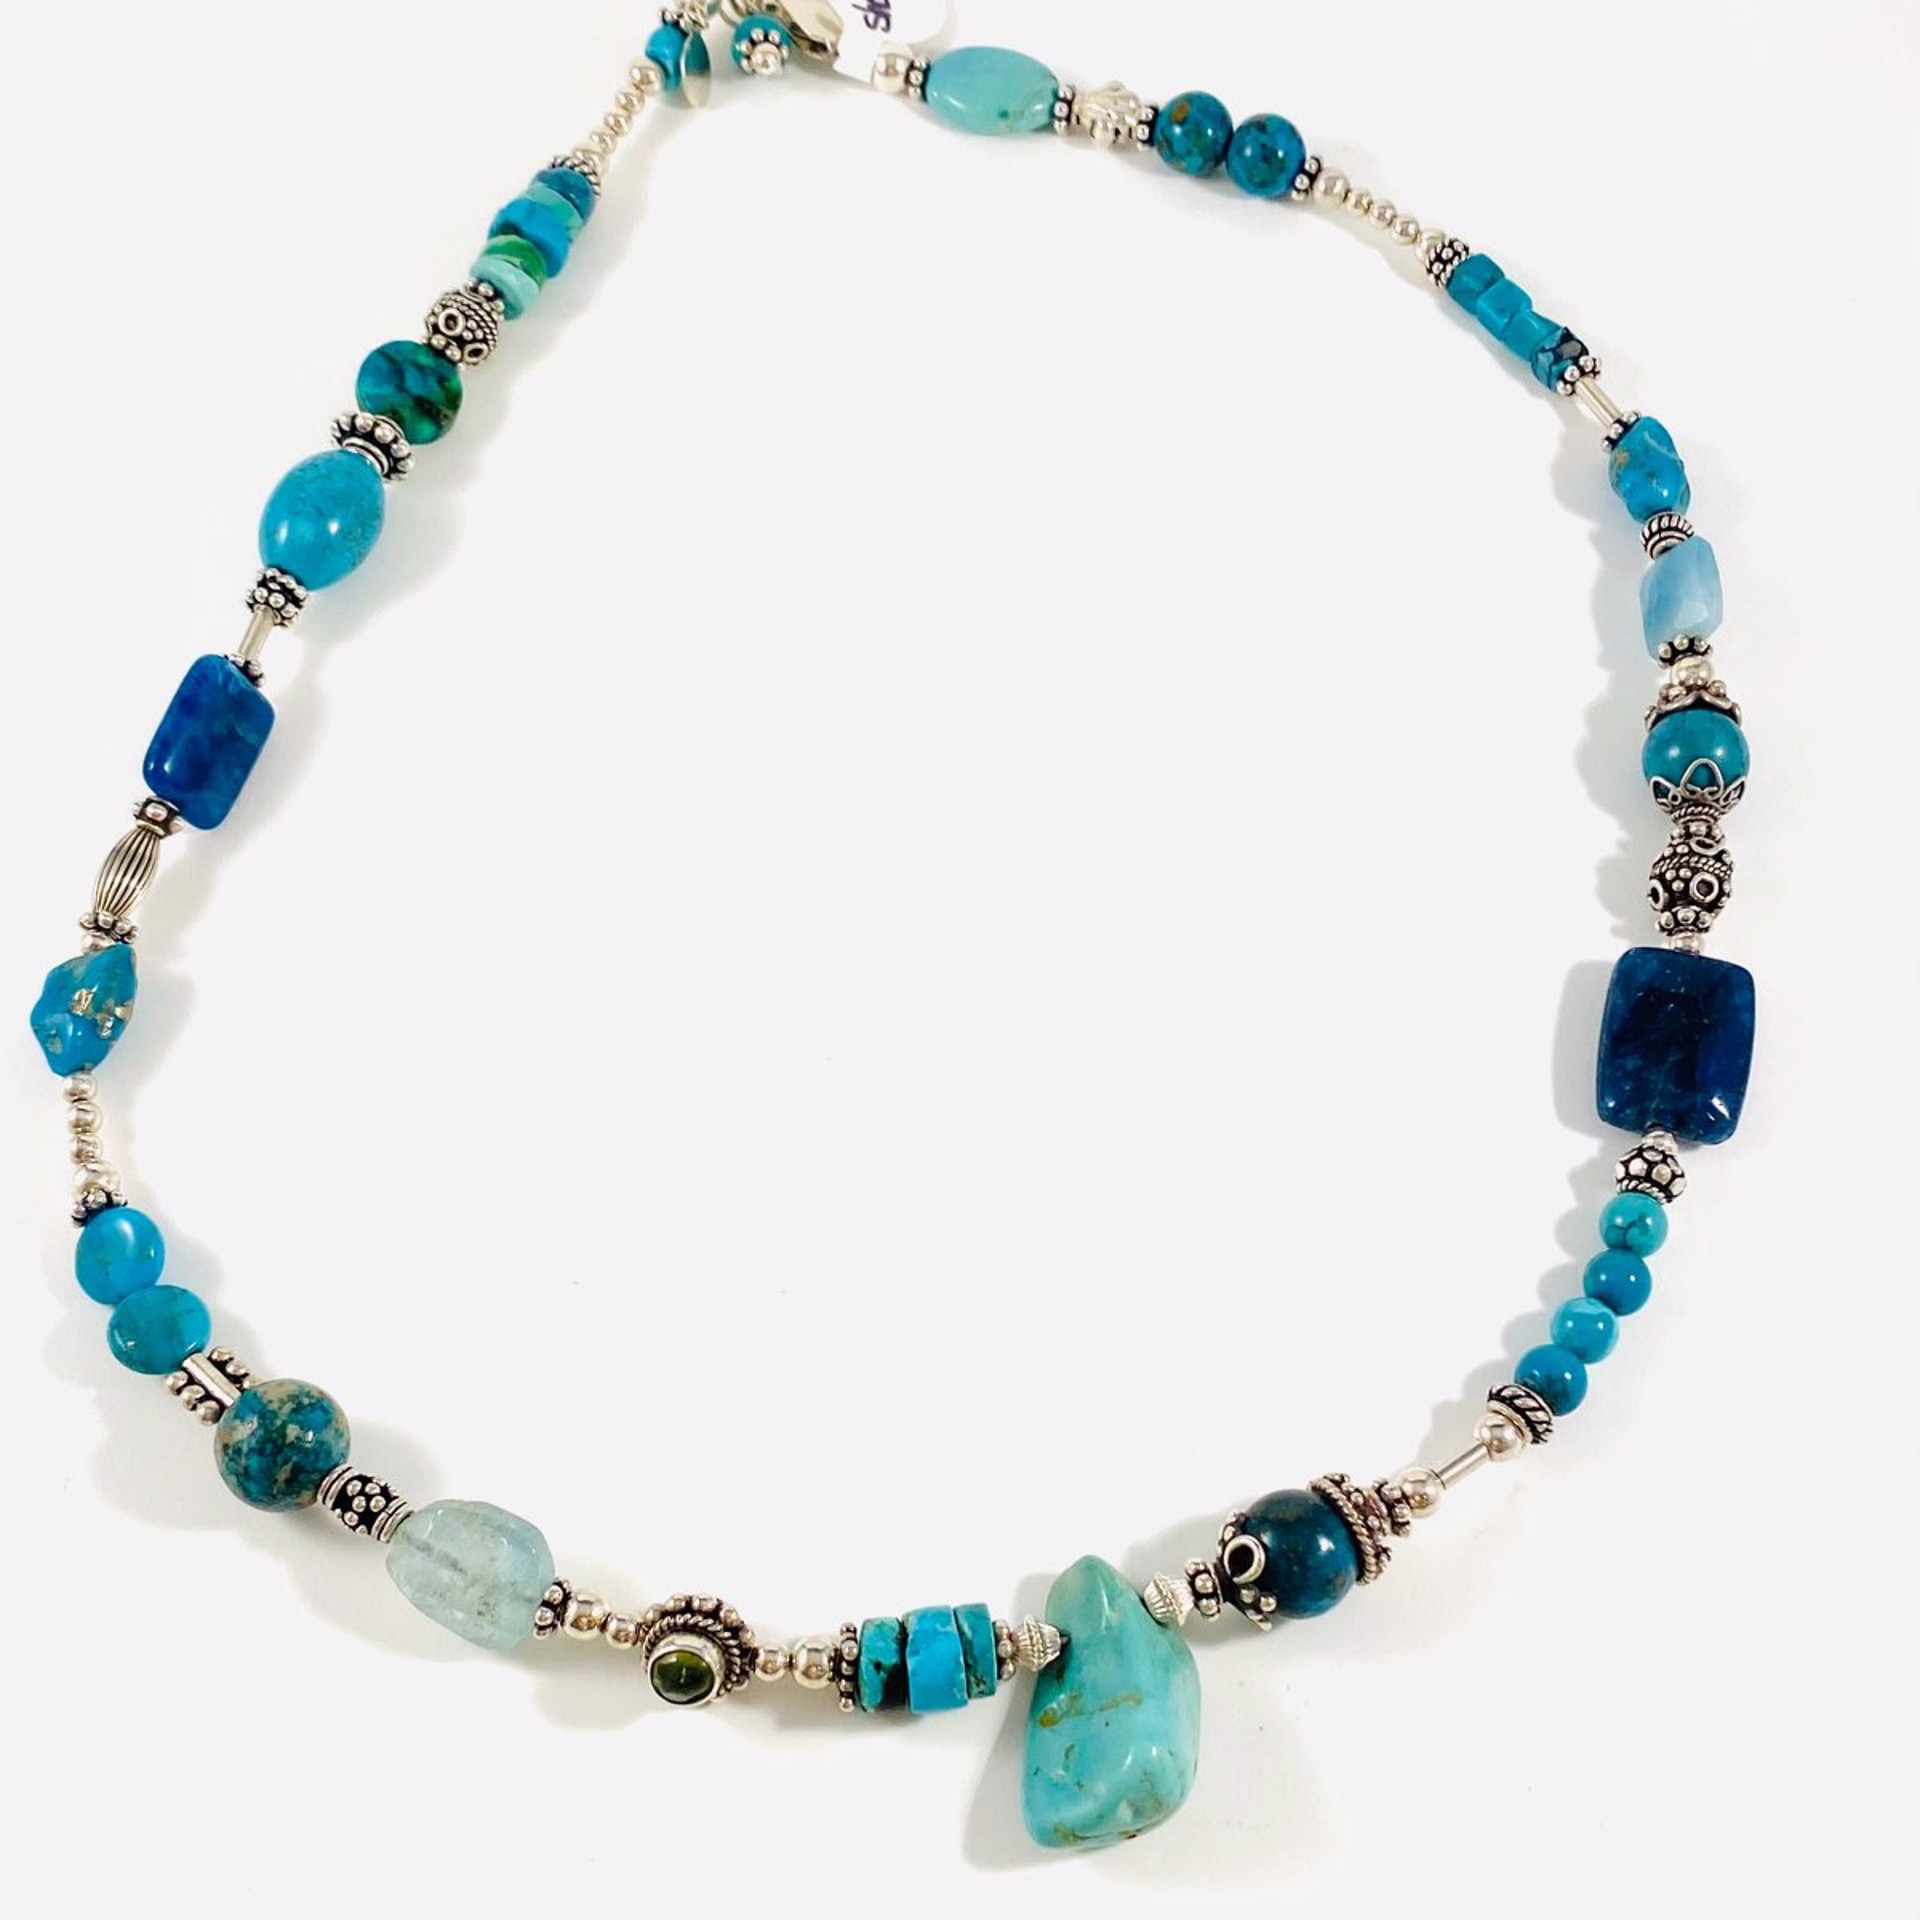 Turquoise and Apatite Necklace SHOSH22-1 by Shoshannah Weinisch